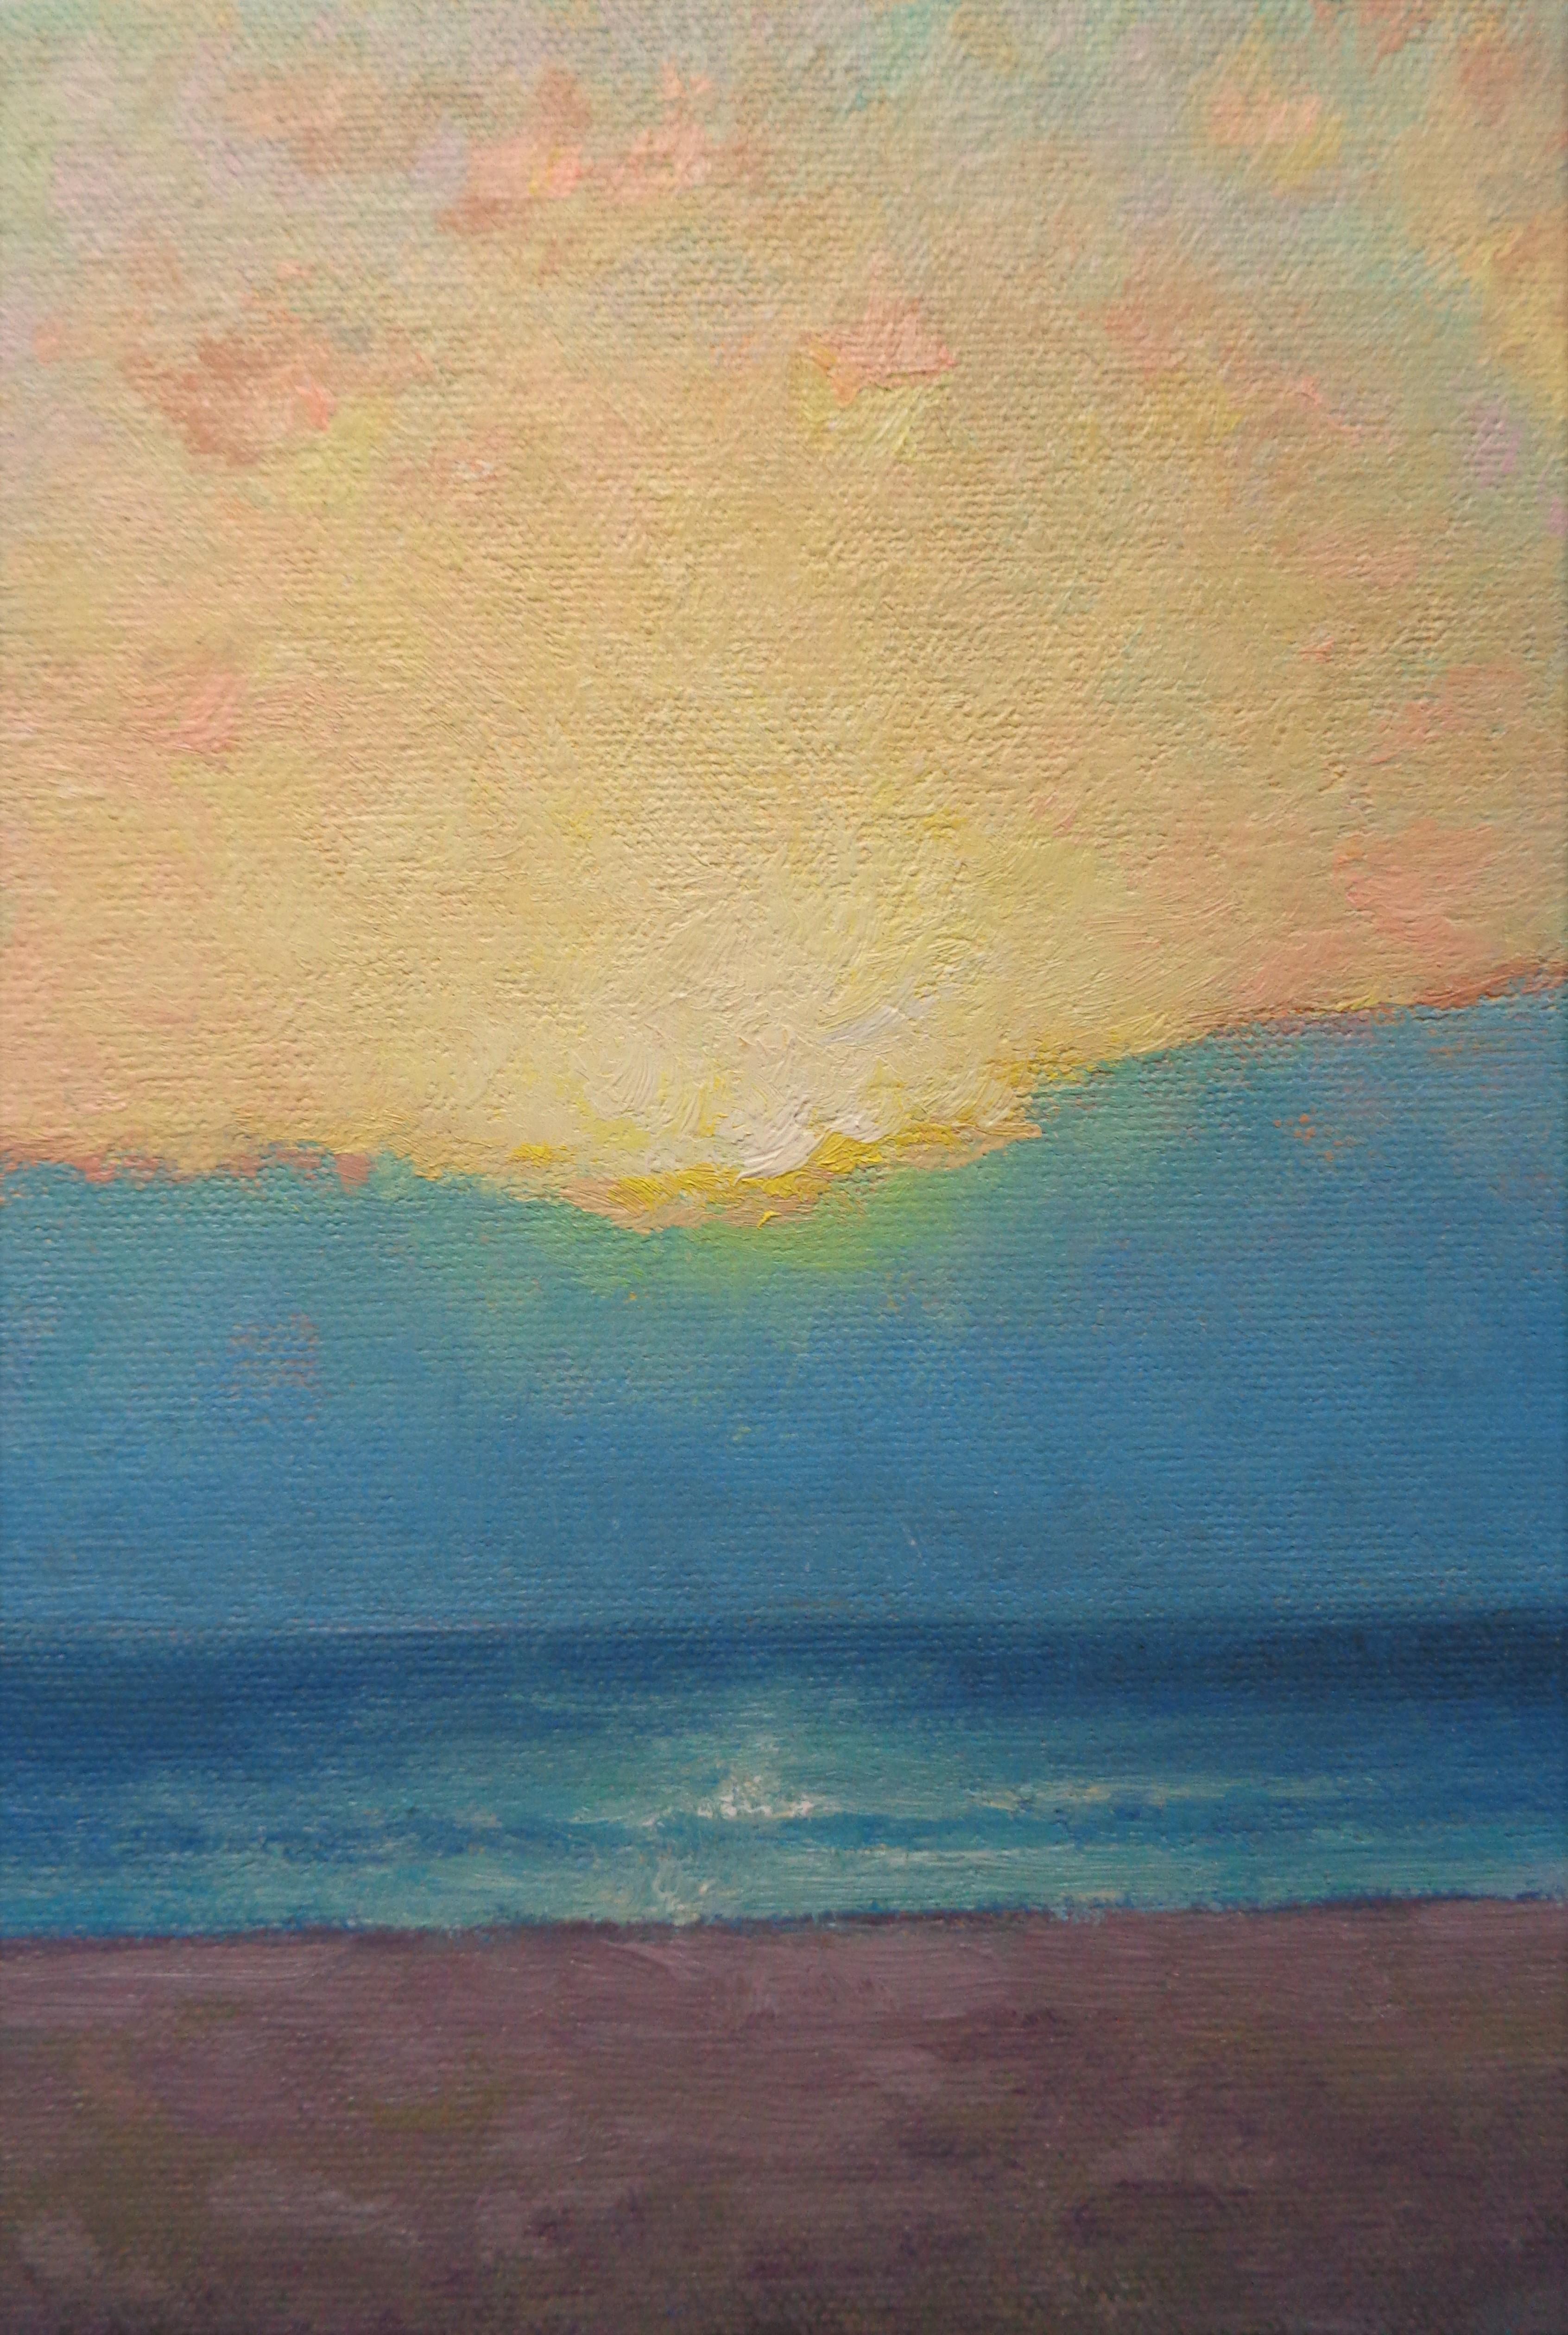 Beach Ocean Impressionistic Seascape Painting Michael Budden Morning Abstraction For Sale 2